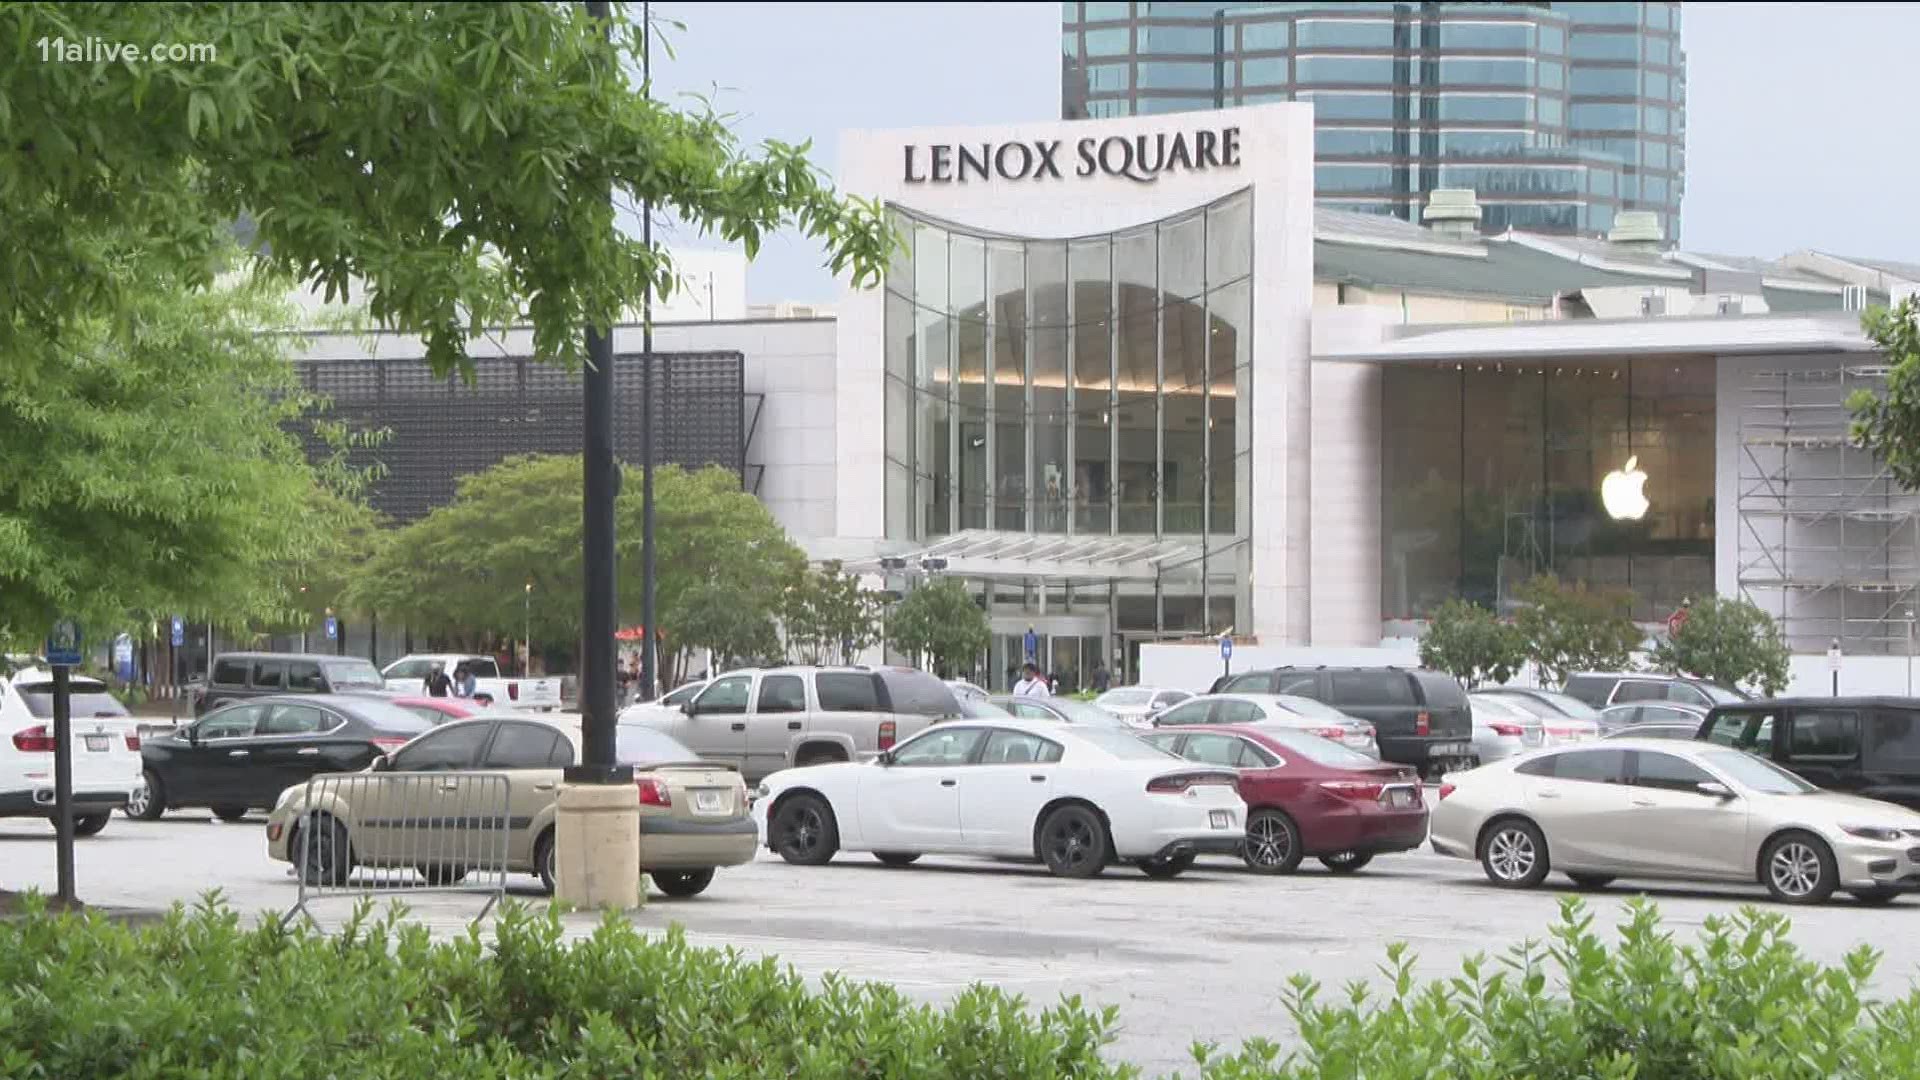 A list of recent shootings at metro Atlanta shopping centers